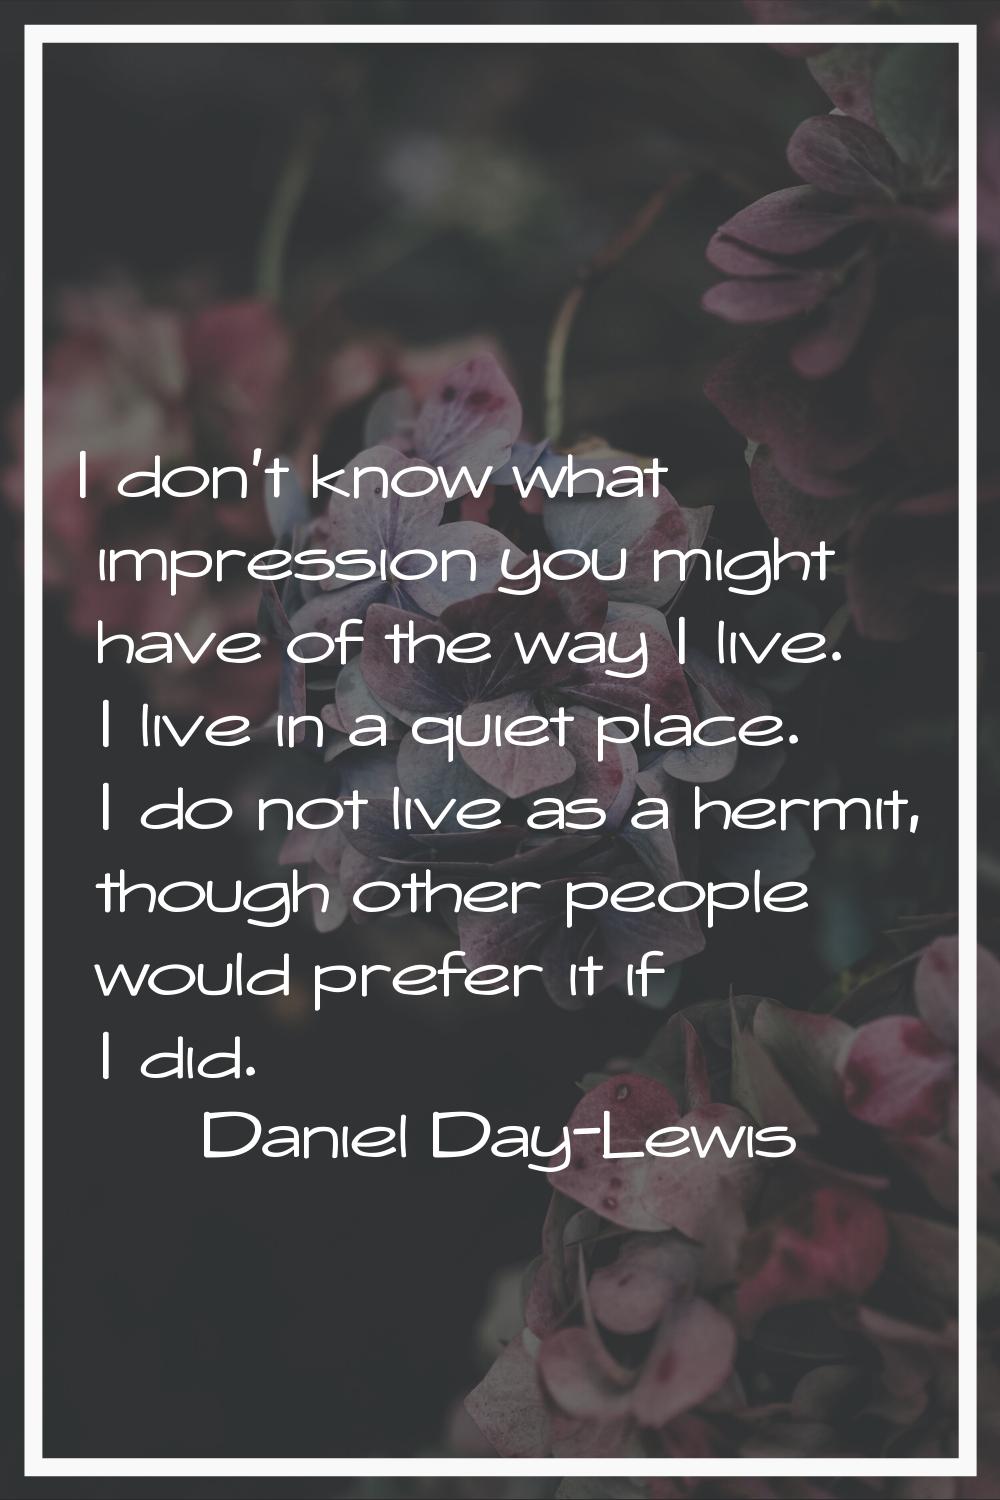 I don't know what impression you might have of the way I live. I live in a quiet place. I do not li